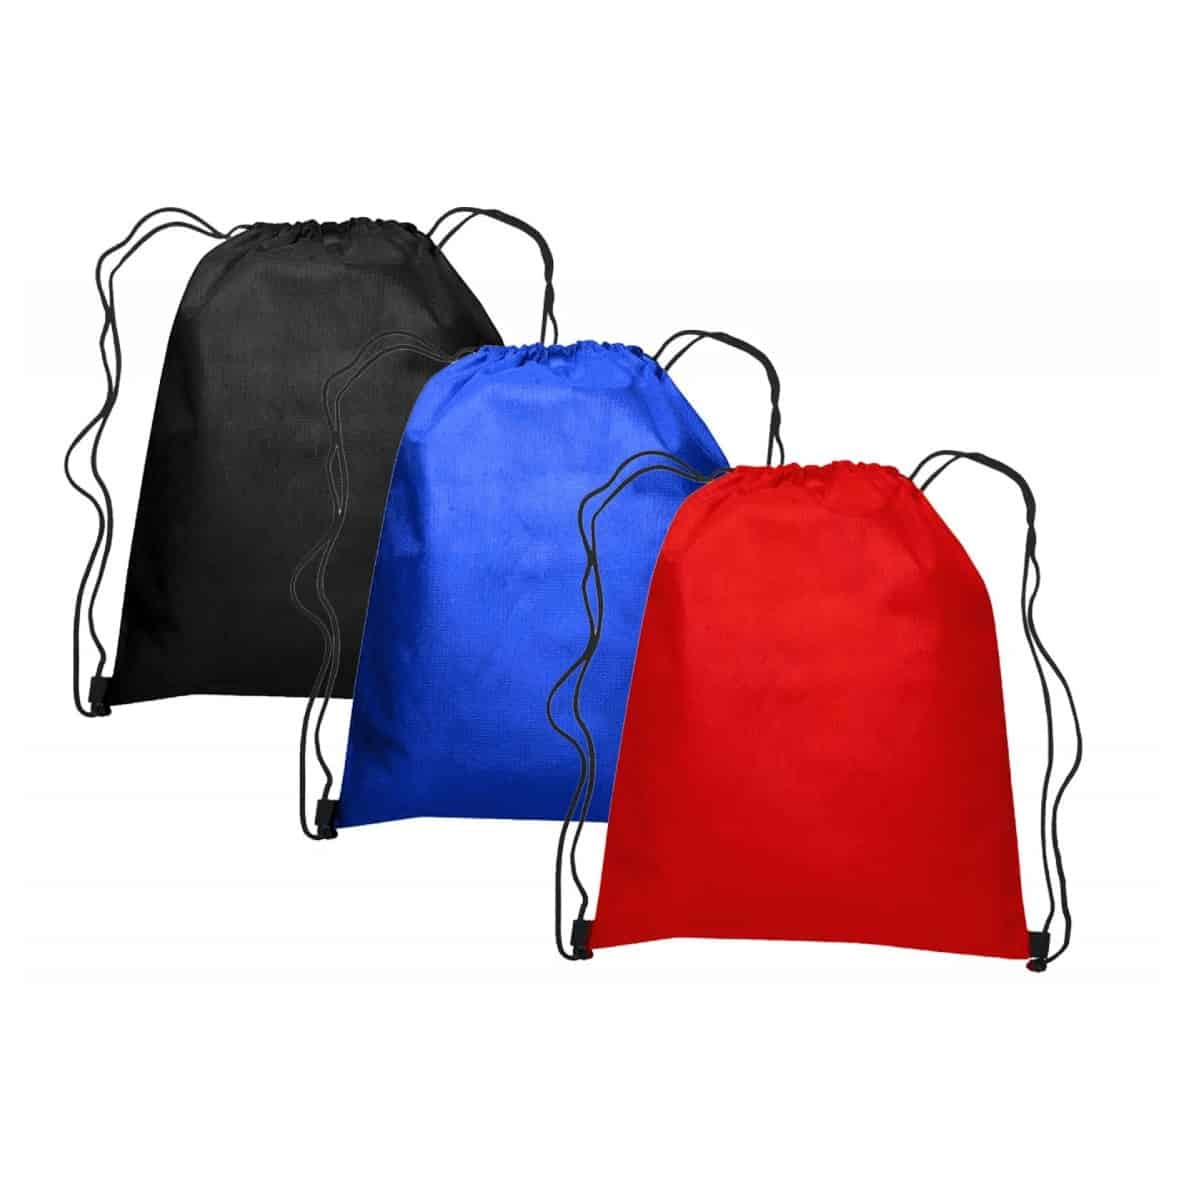 Non Woven Bag Supplier Malaysia at SJ-World Gifts Malaysia | Premium Gifts, Corporate Gifts and Door Gifts Malaysia Supplier